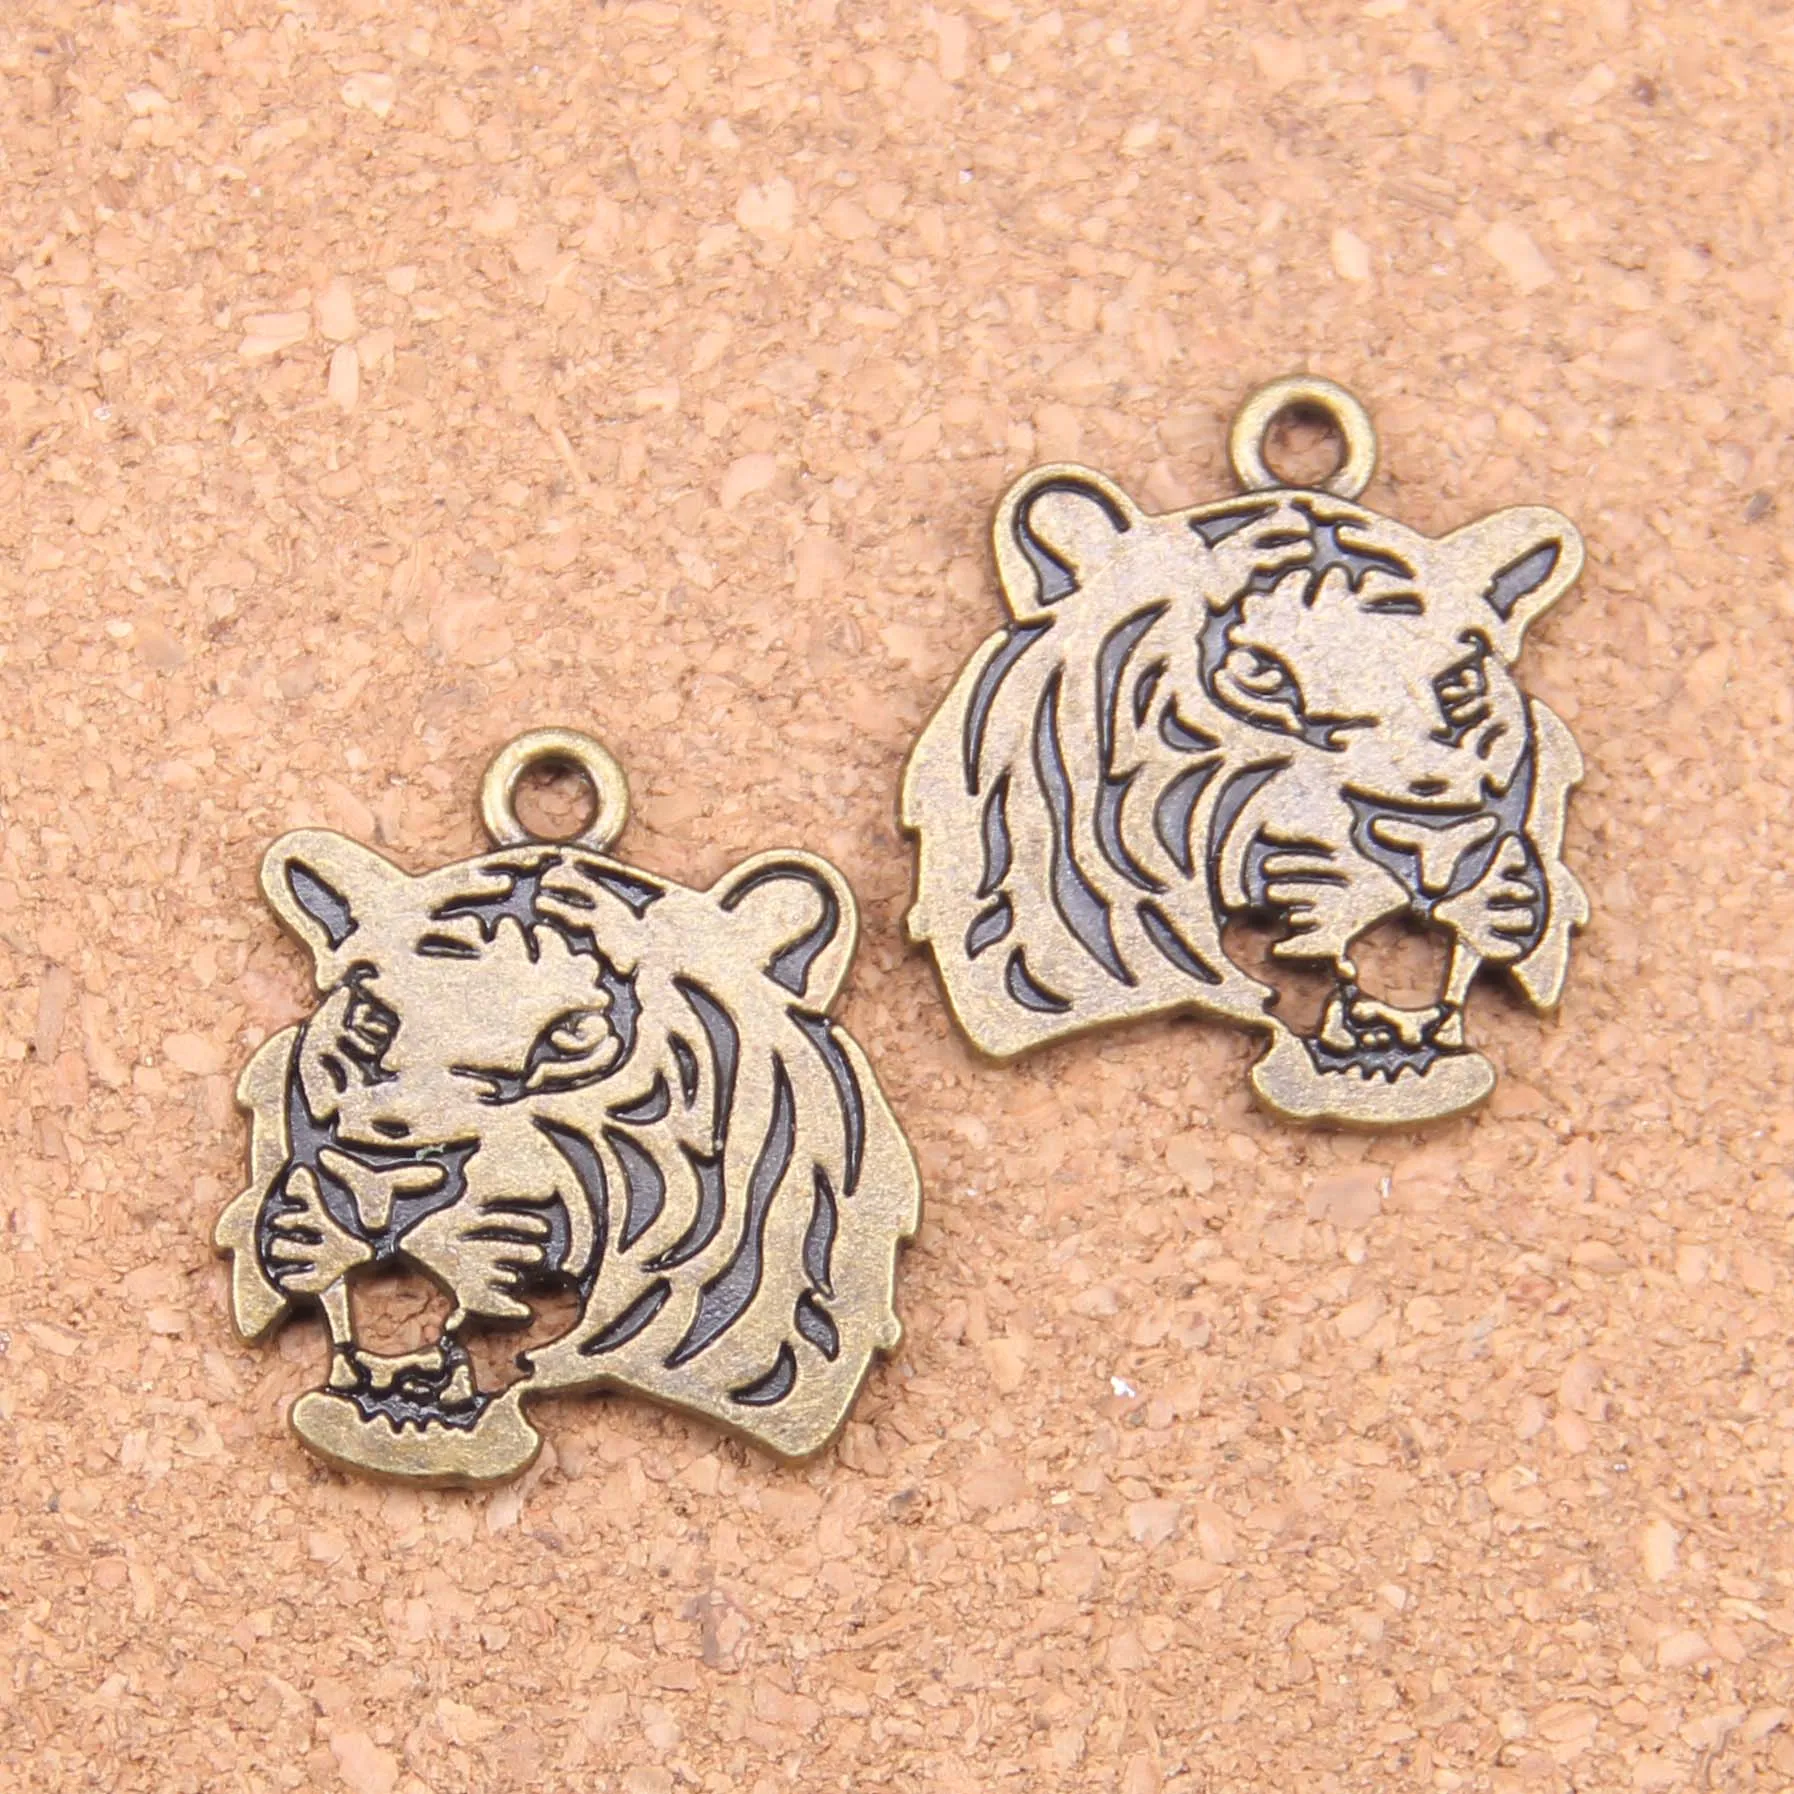 Antique Silver Bronze Plated roaring tiger head Charms Pendant DIY Necklace Bracelet Bangle Findings 27 24mm257S